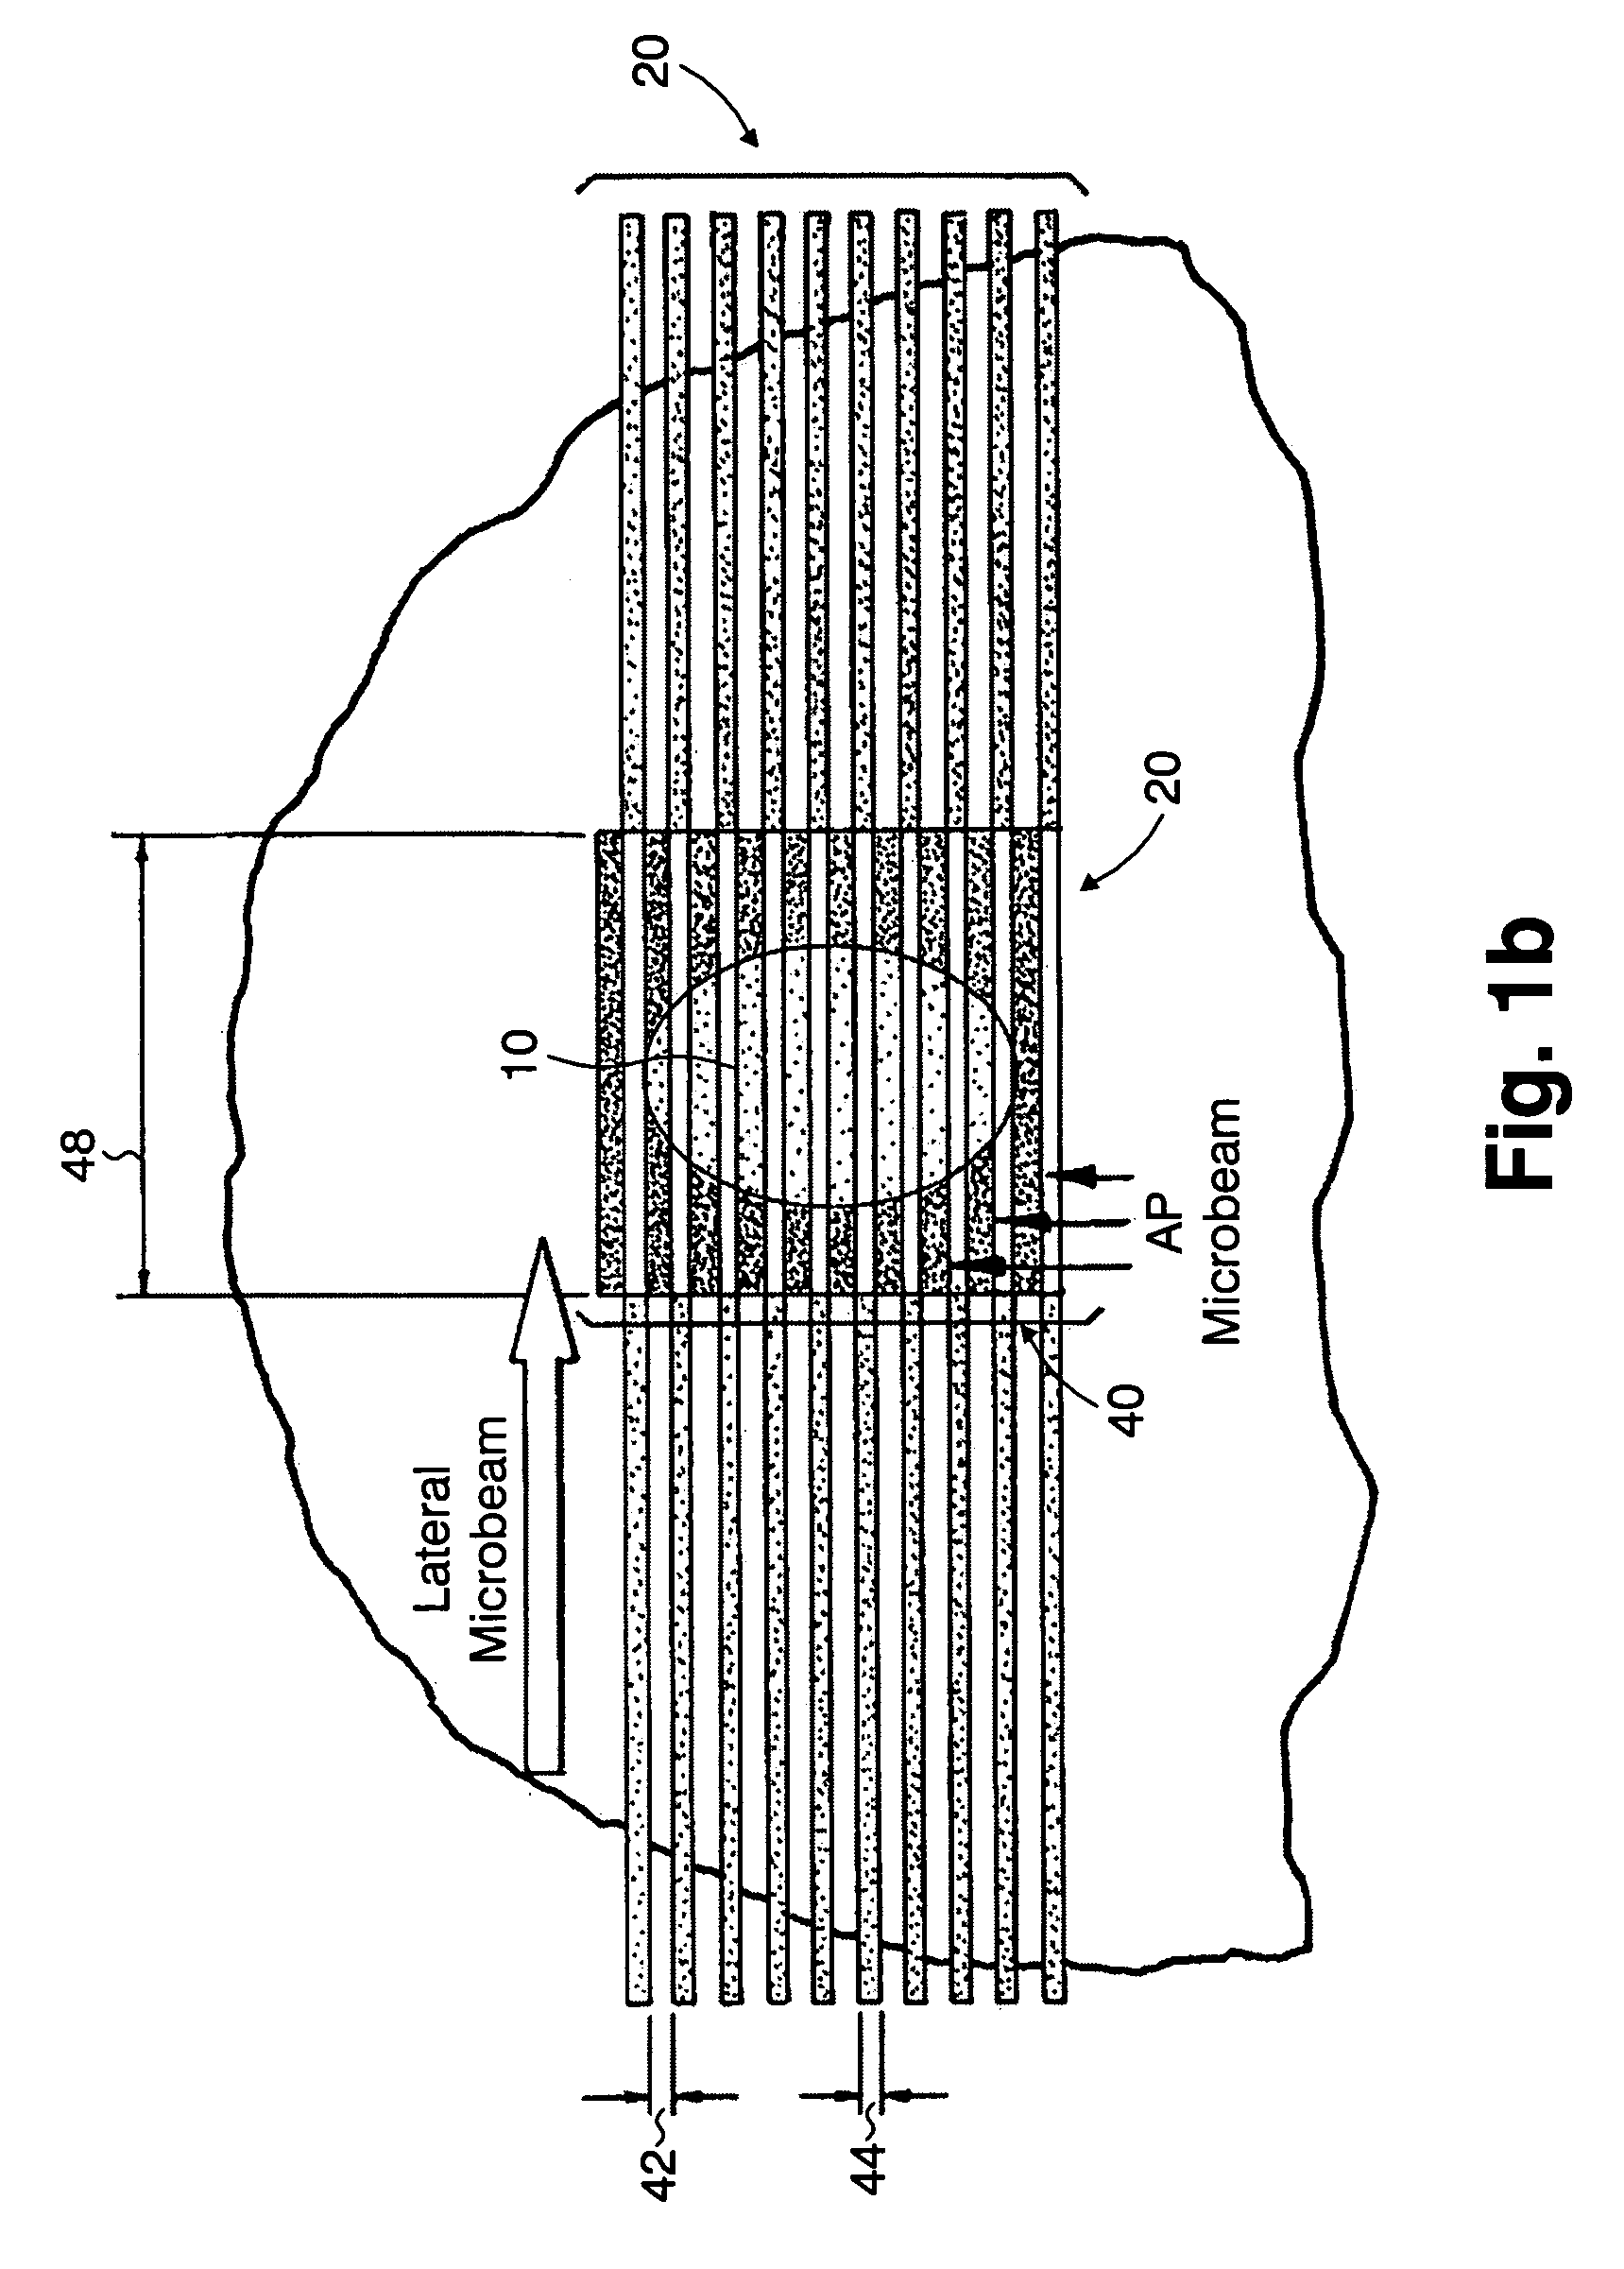 Methods for implementing microbeam radiation therapy